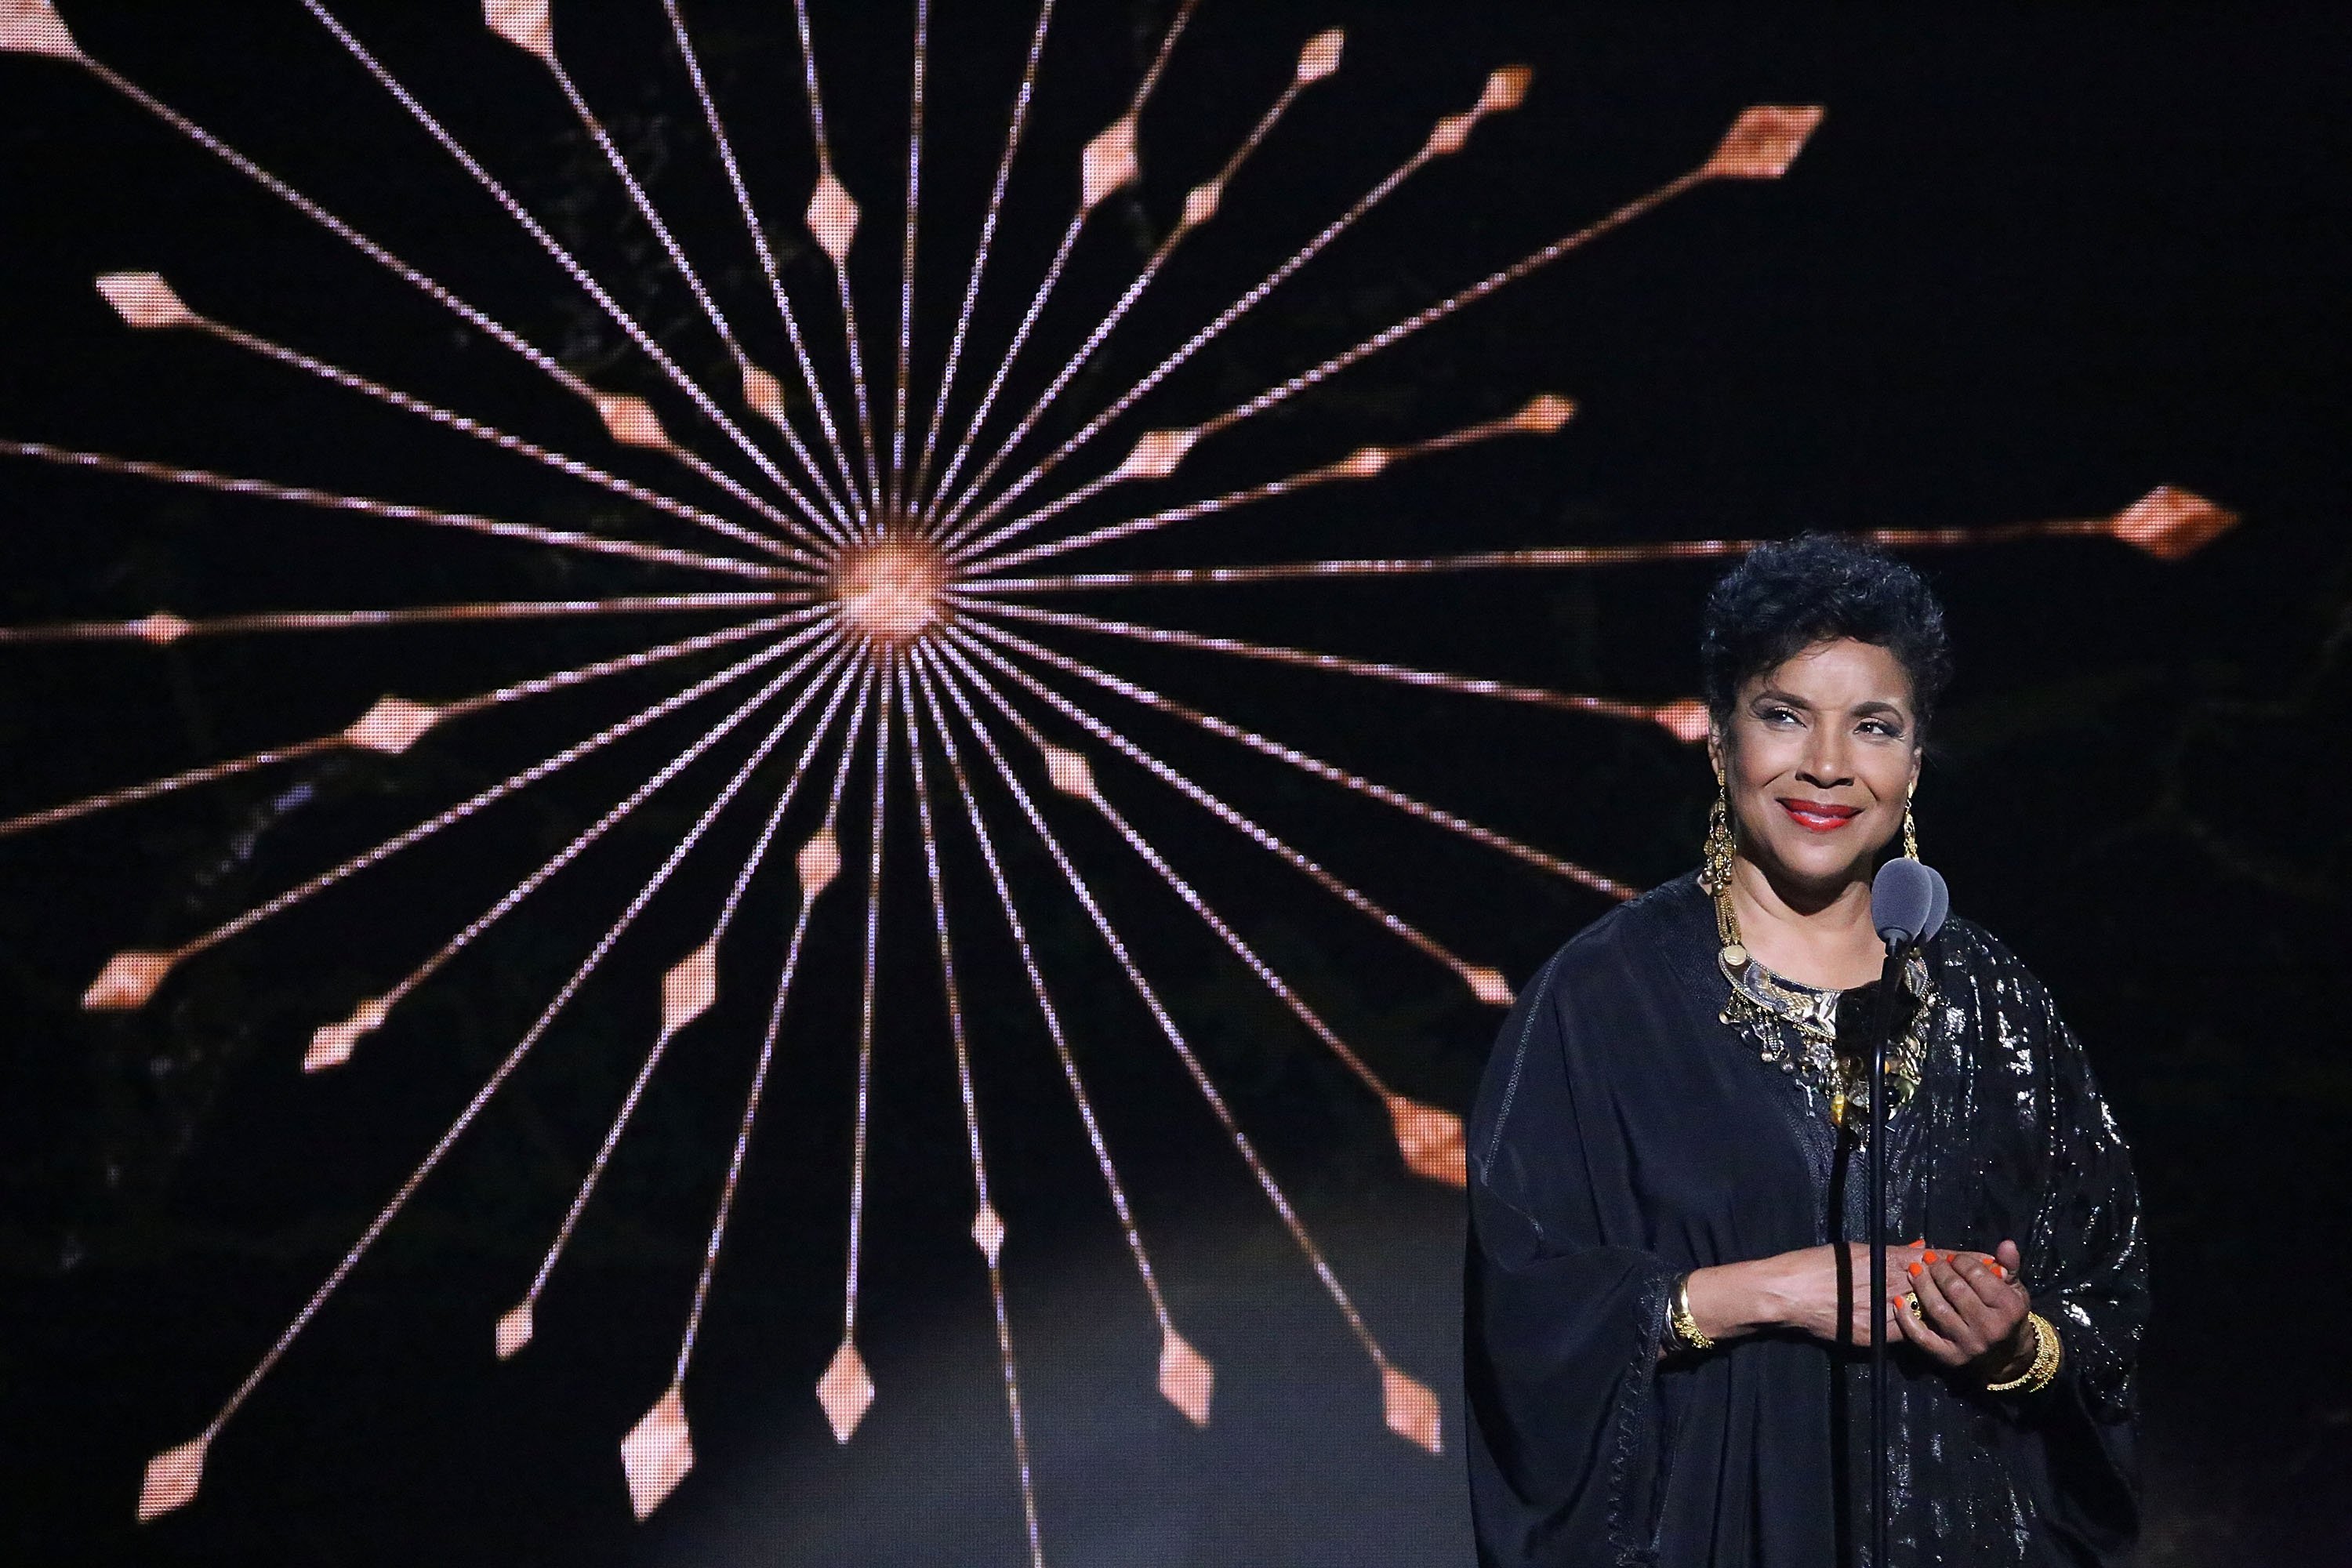 Phylicia Rashad onstage during the Black Girls Rock! 2018 show at New Jersey Performing Arts Center on August 26, 2018 in Newark, New Jersey | Photo: GettyImages